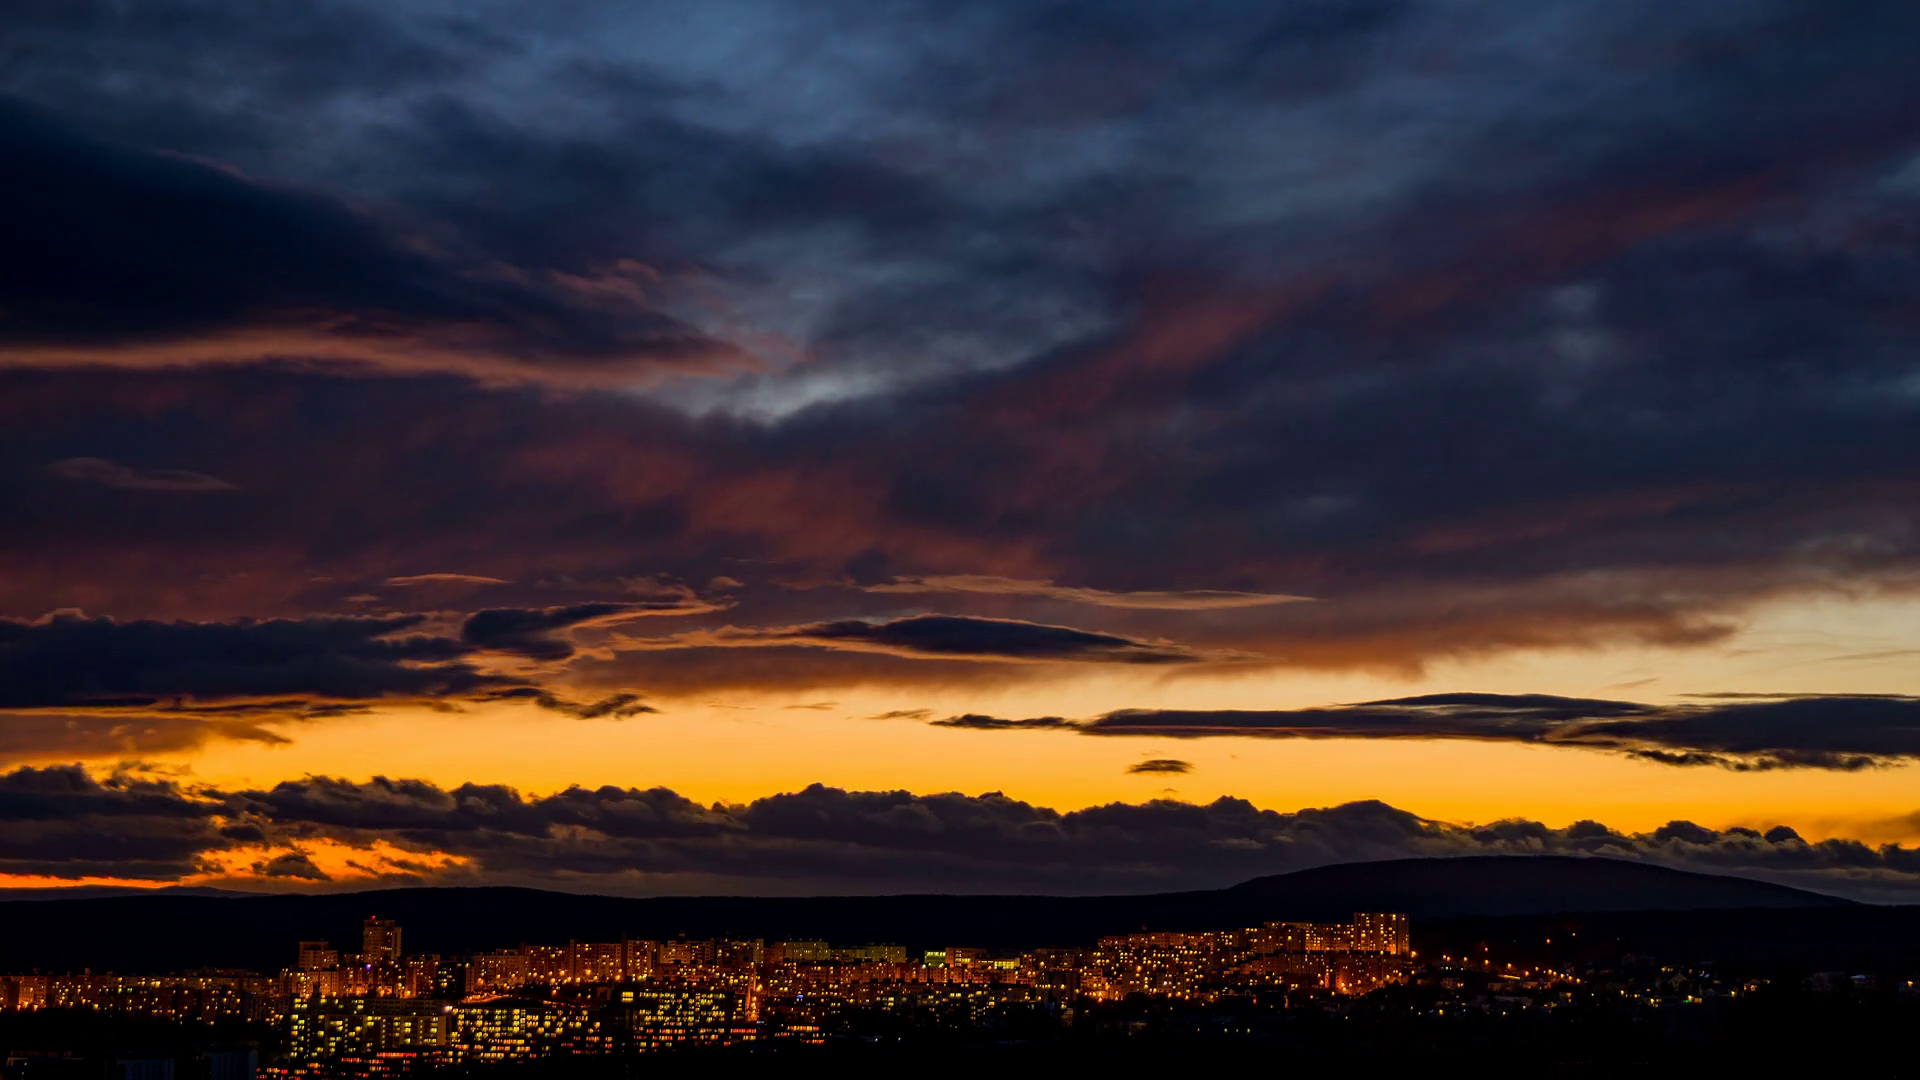 Twilight sky after sunset, Clouds moving over the city, Timelapse ...